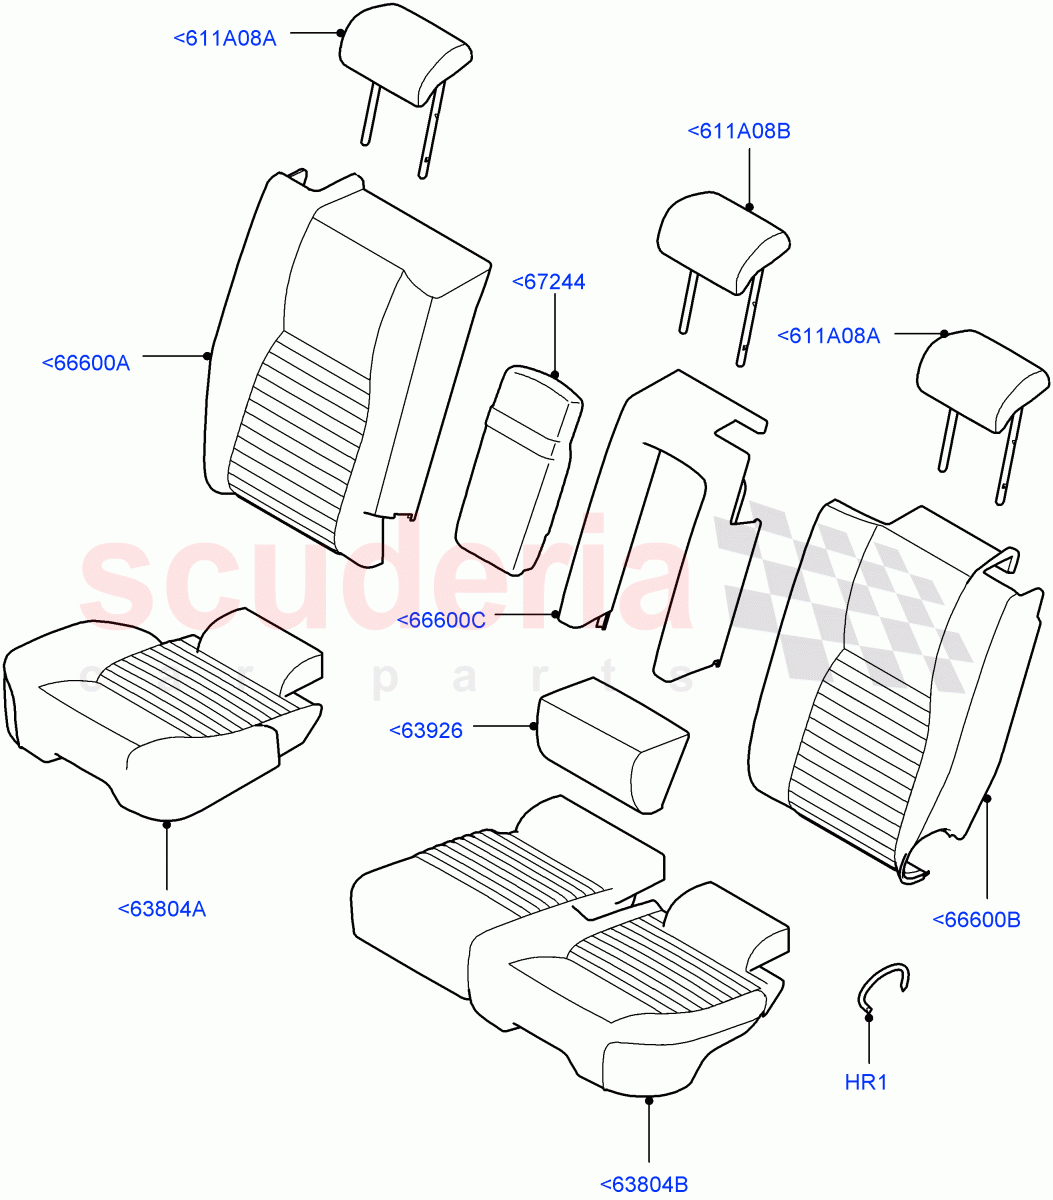 Rear Seat Covers(Taurus Leather Perforated,Changsu (China),60/40 Load Through With Slide,With 60/40 Manual Fold Thru Rr Seat)((V)FROMFG000001) of Land Rover Land Rover Discovery Sport (2015+) [2.0 Turbo Diesel AJ21D4]